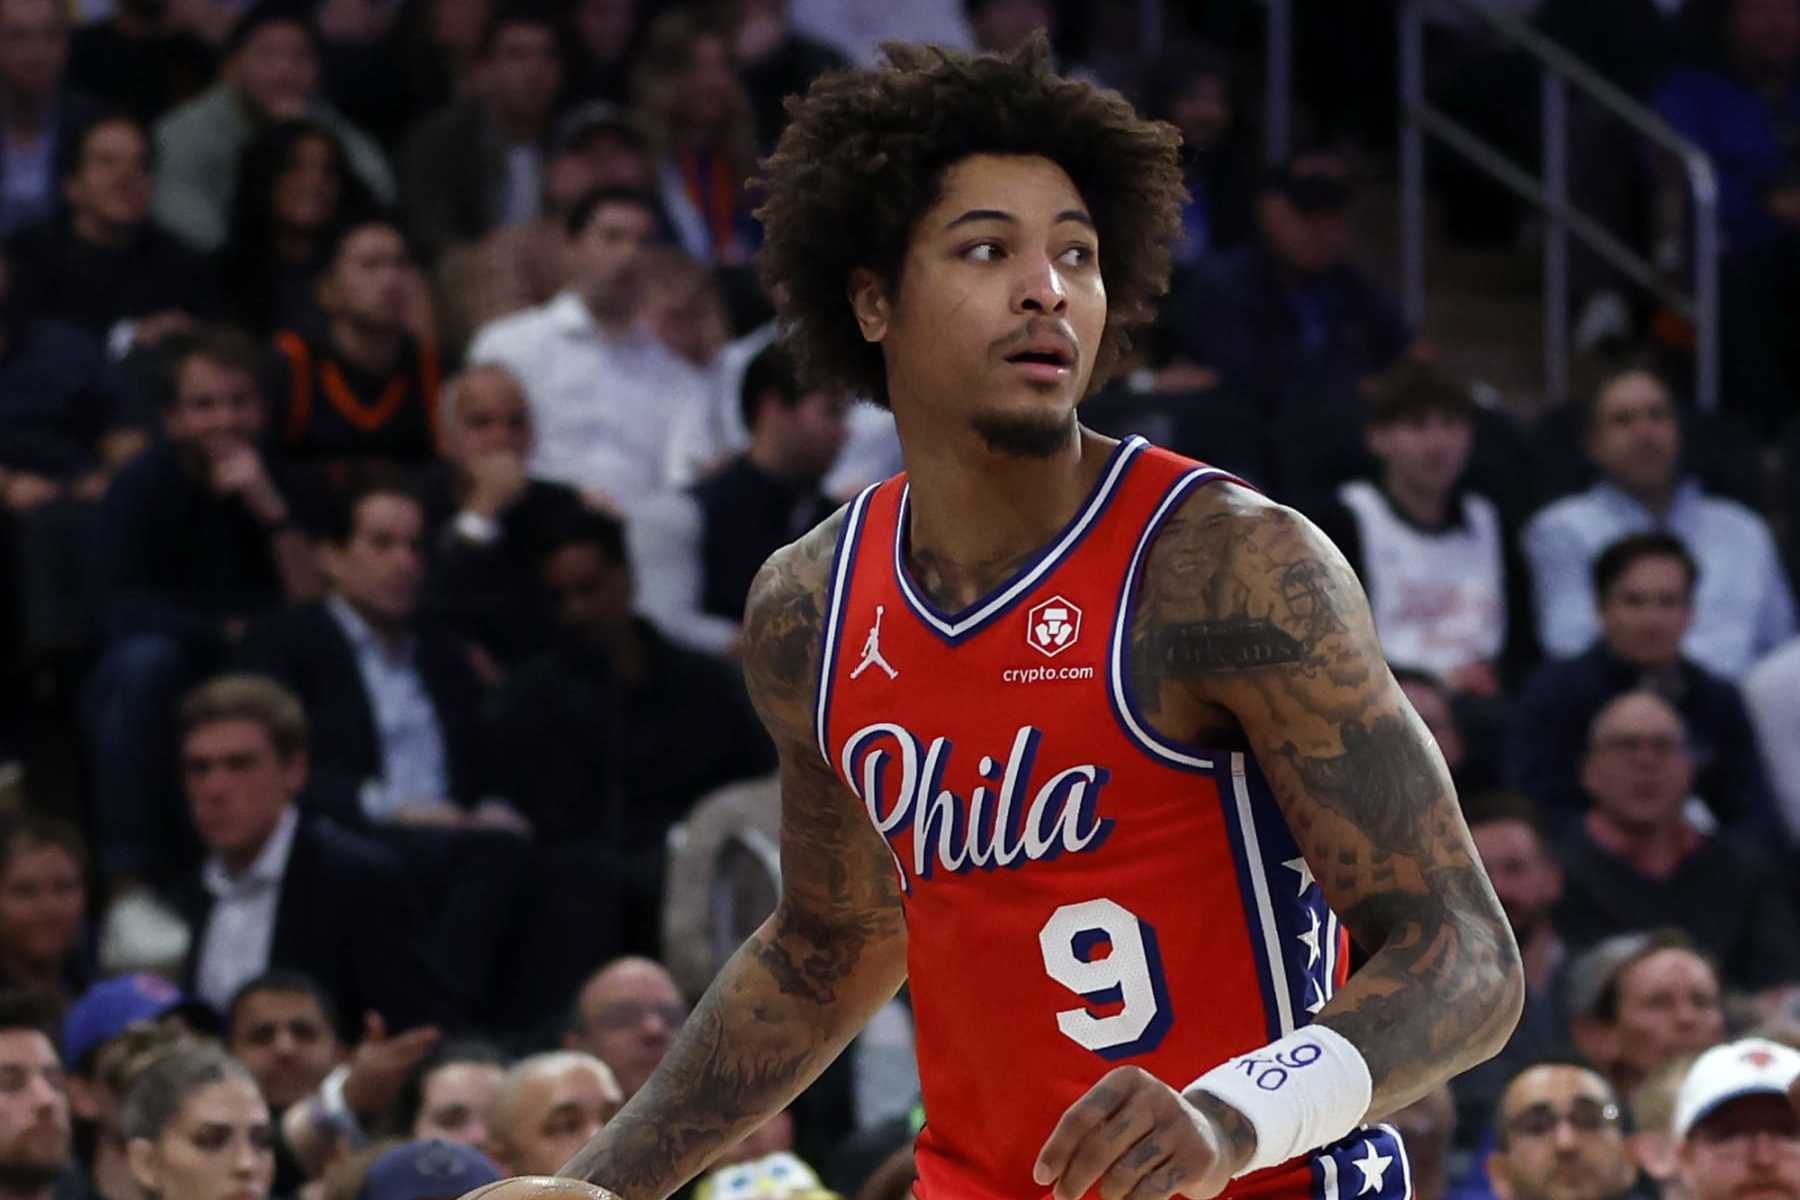 Report: Kelly Oubre Jr.’s Car Crash After 76ers Game Subject of Internal Police Probe – Bleacher Report